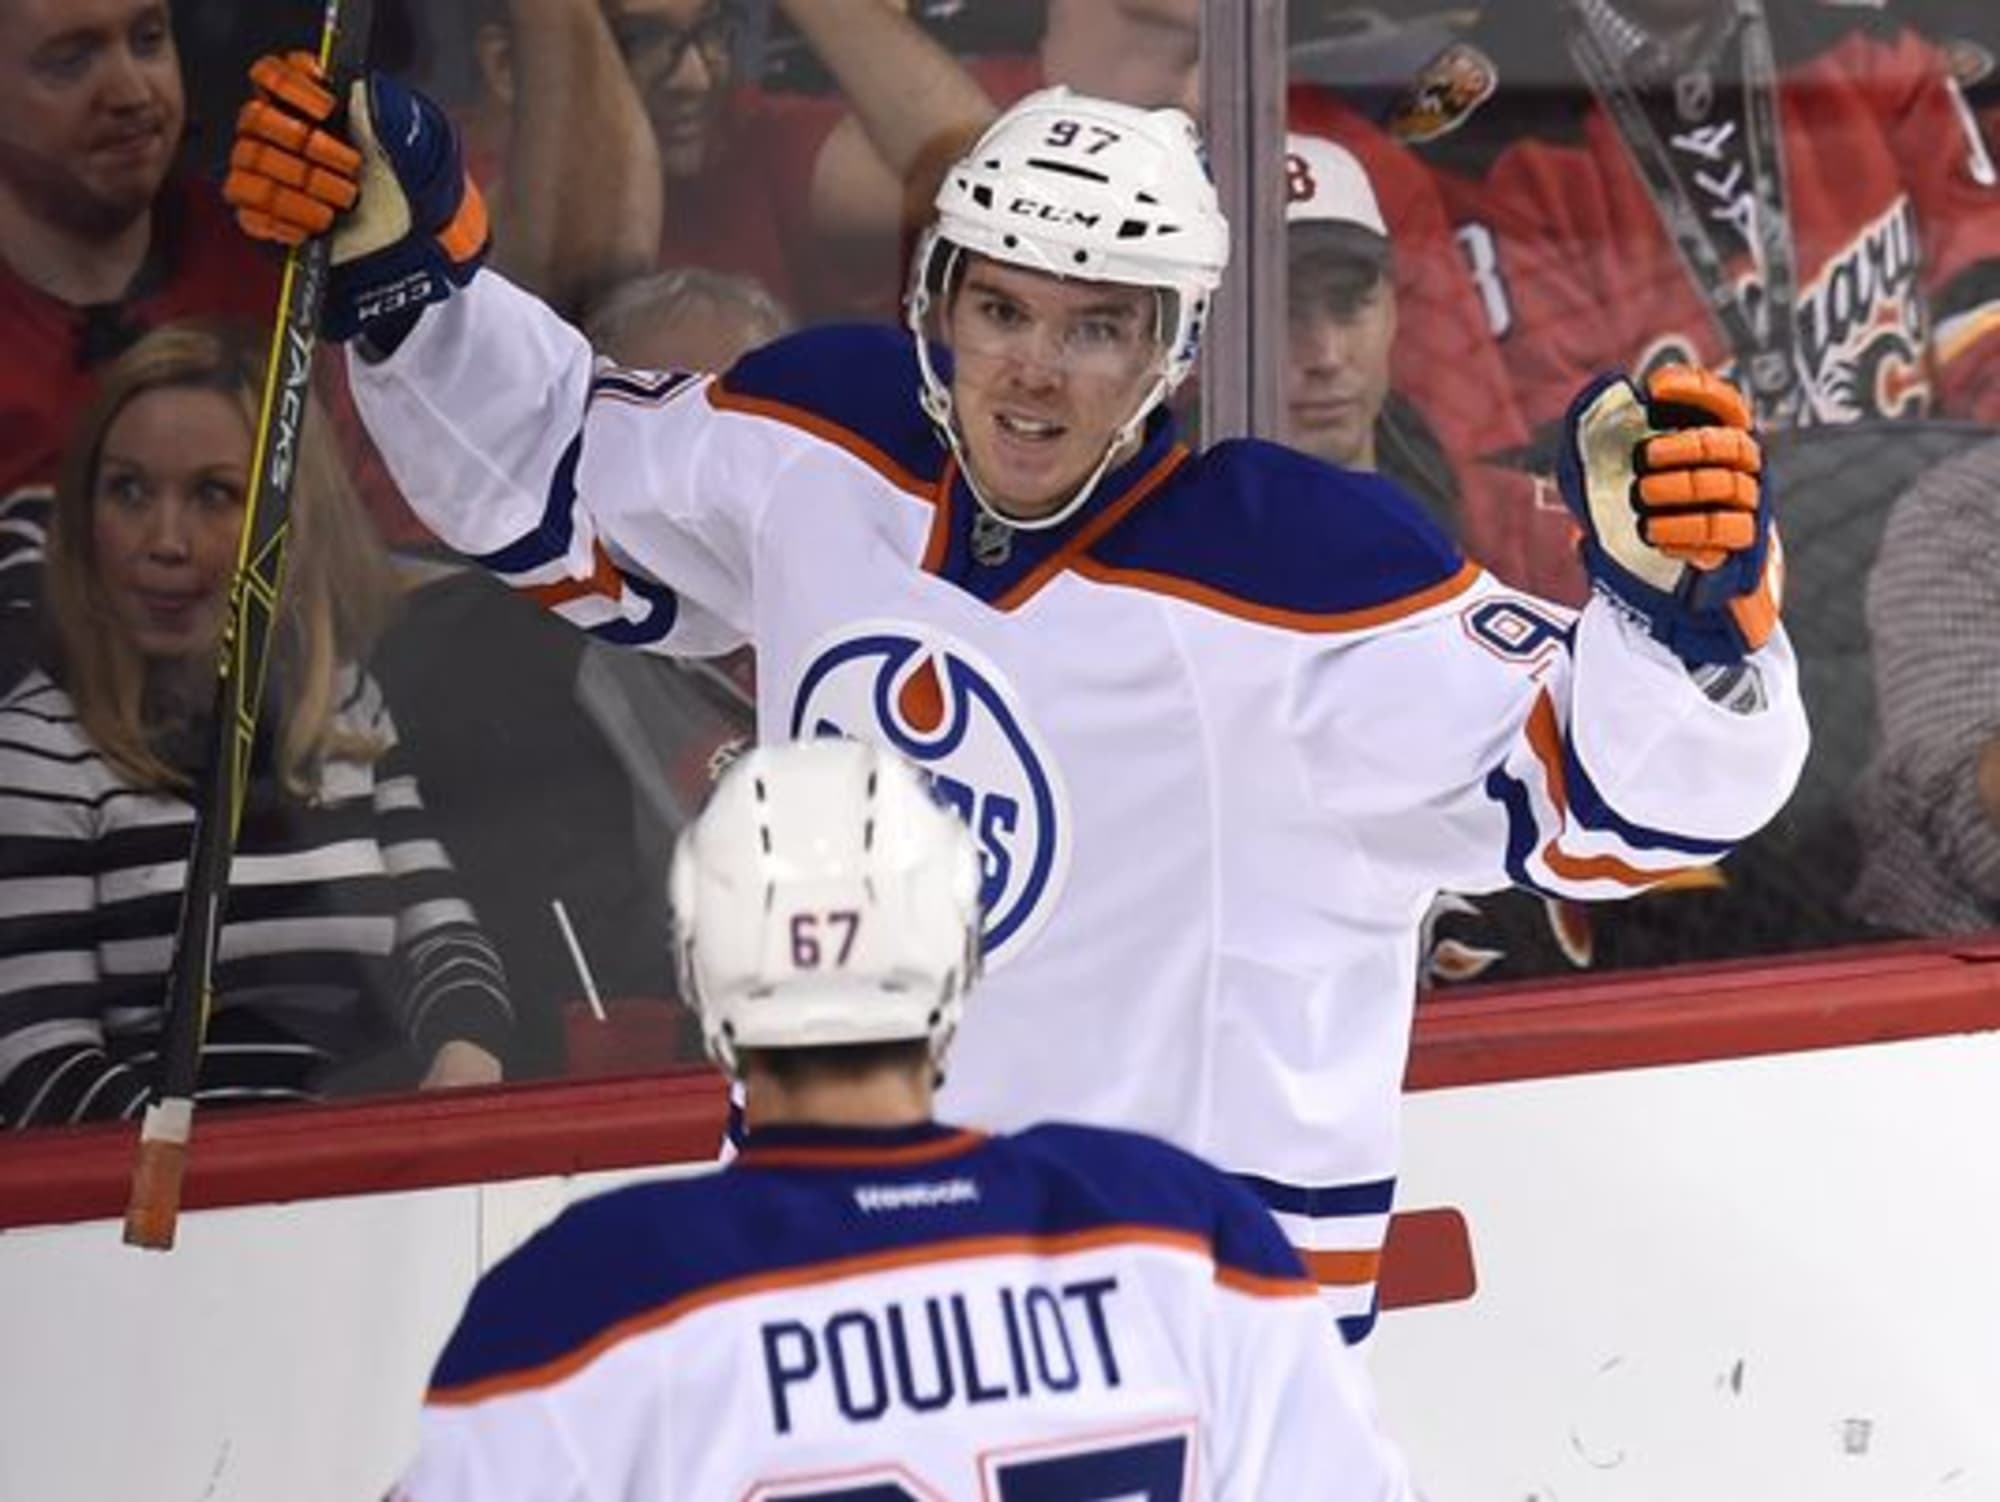 Taylor Hall, Jordan Eberle take shots at each other with hilarious